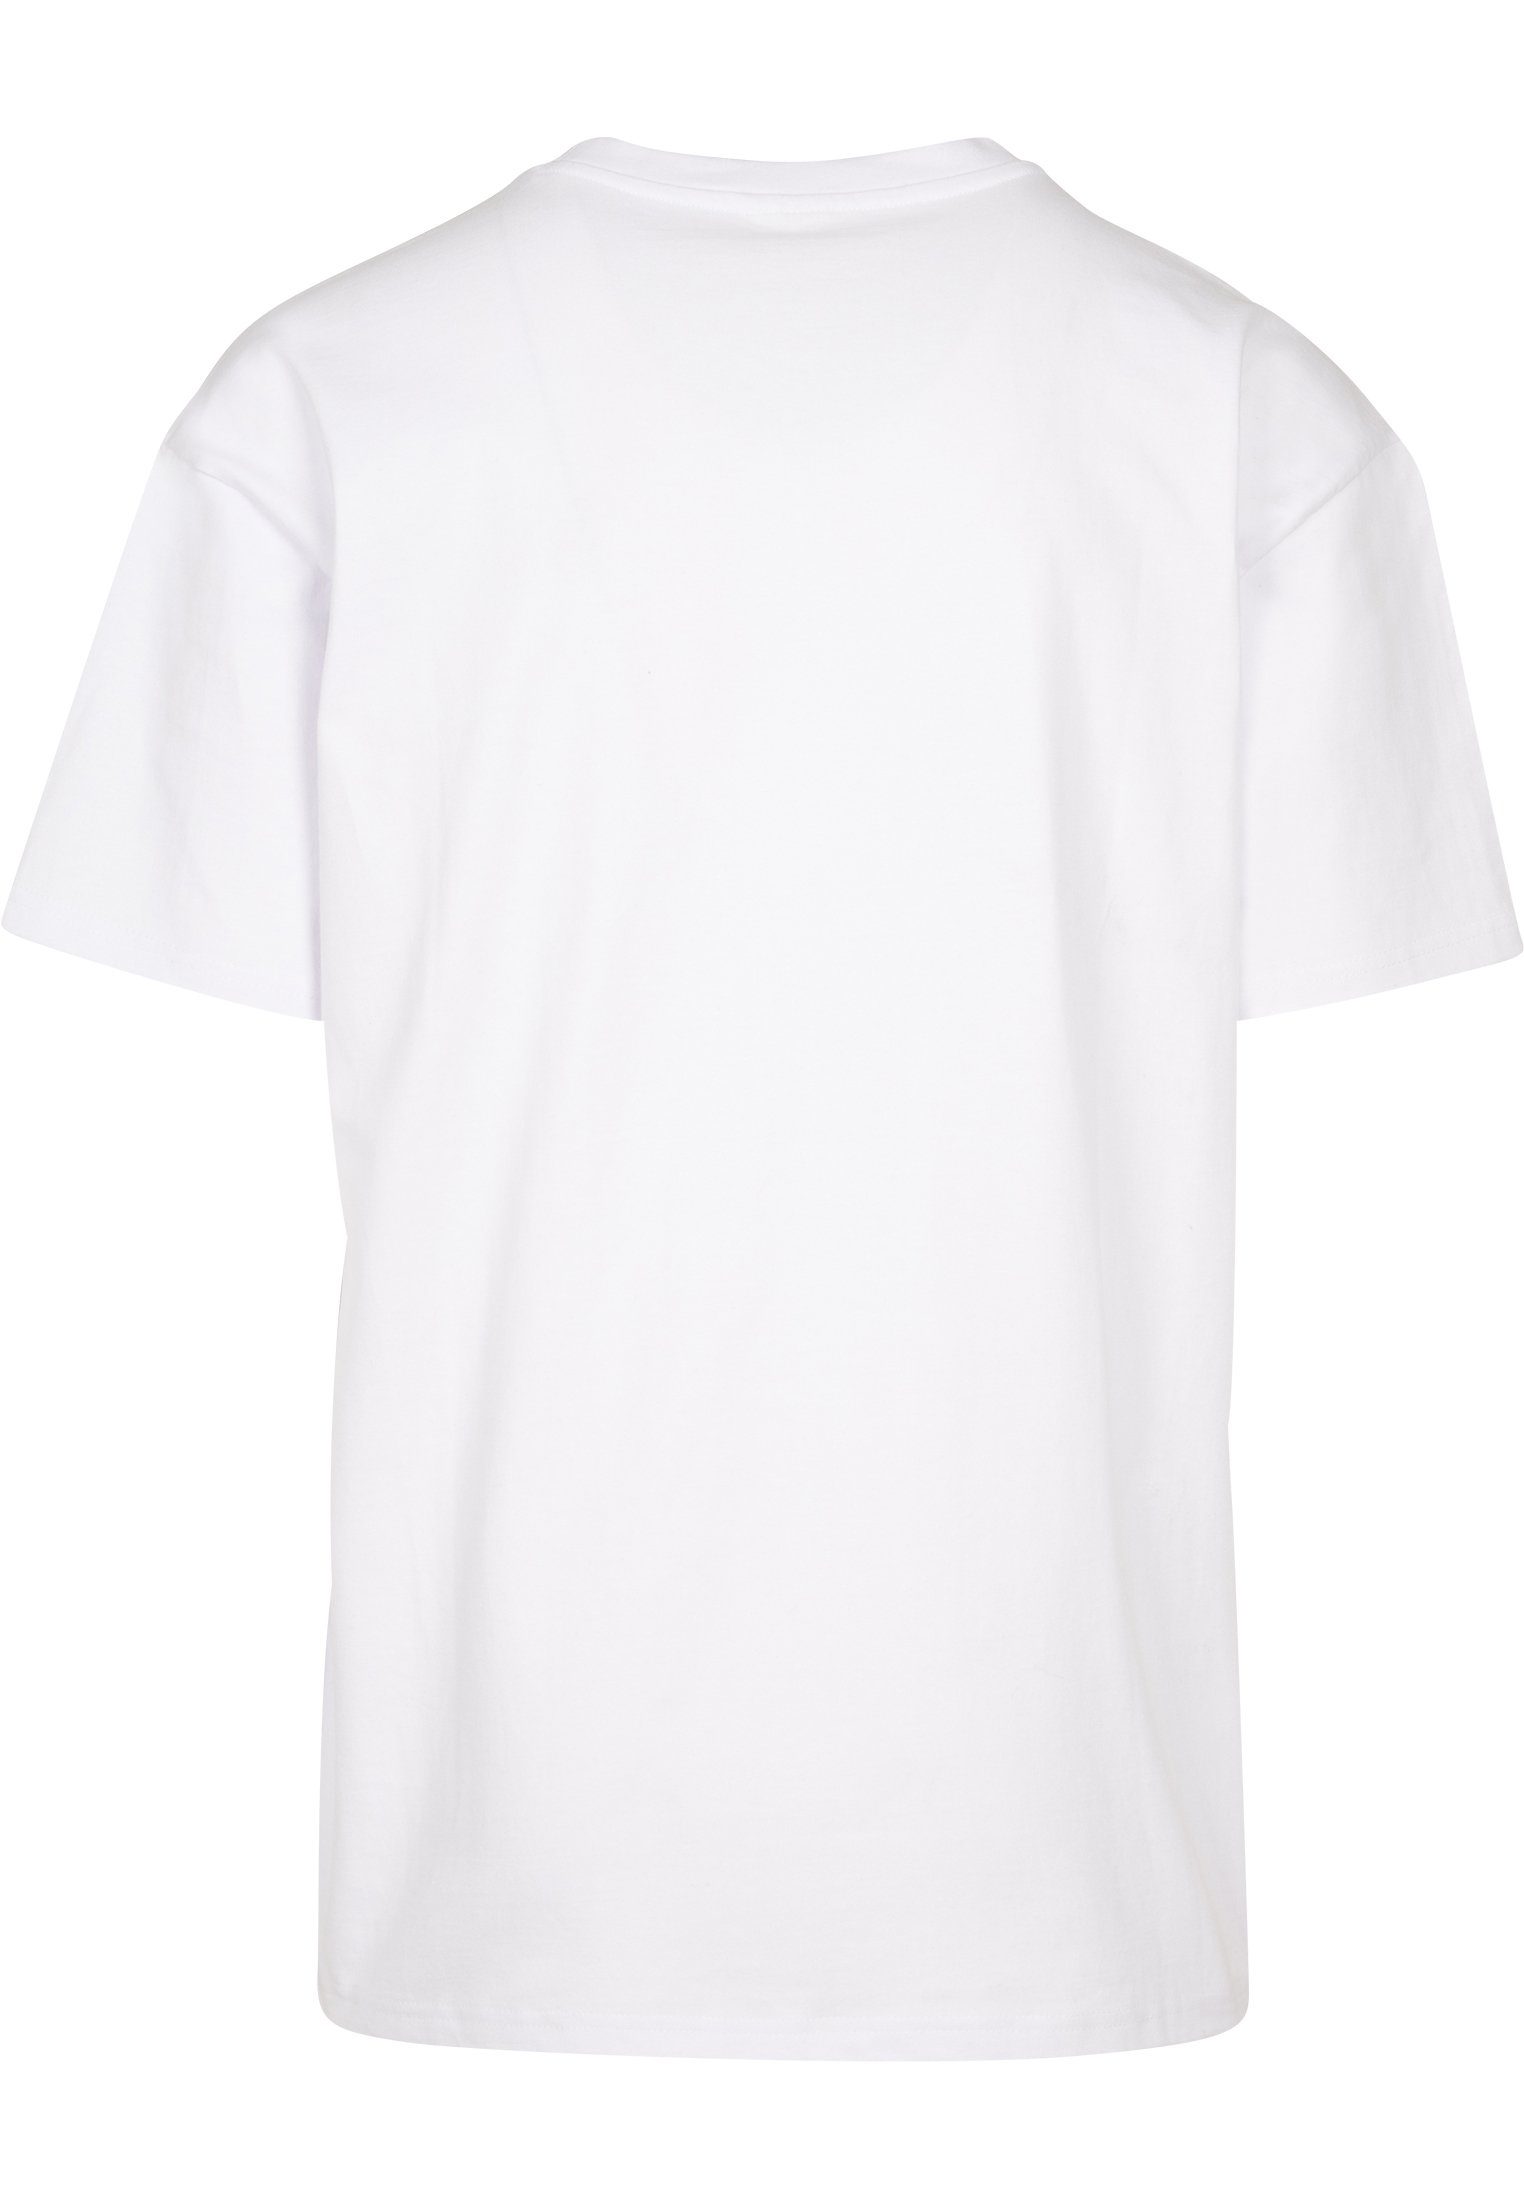 Upscale Kurzarmshirt white Tee Moon Mister (1-tlg) by Phases Accessoires Tee